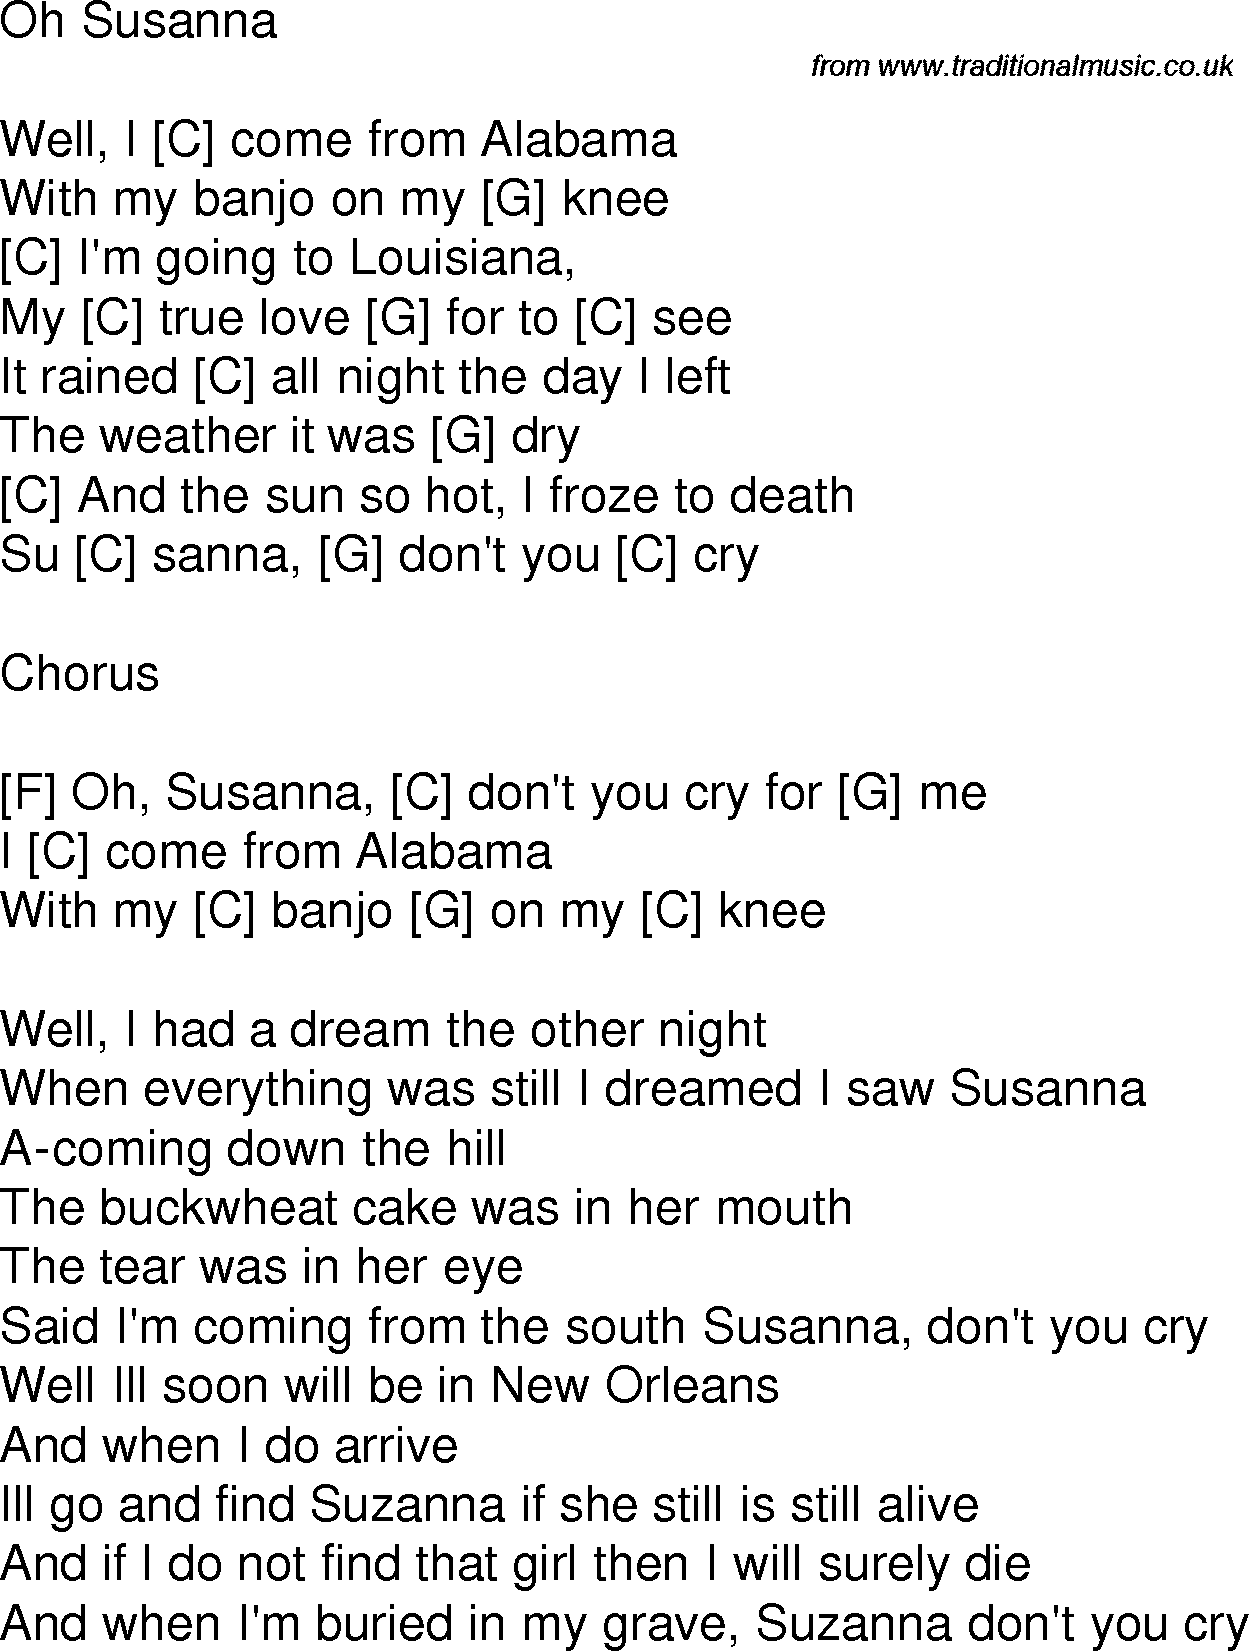 Old time song lyrics with chords for Oh Susanna C